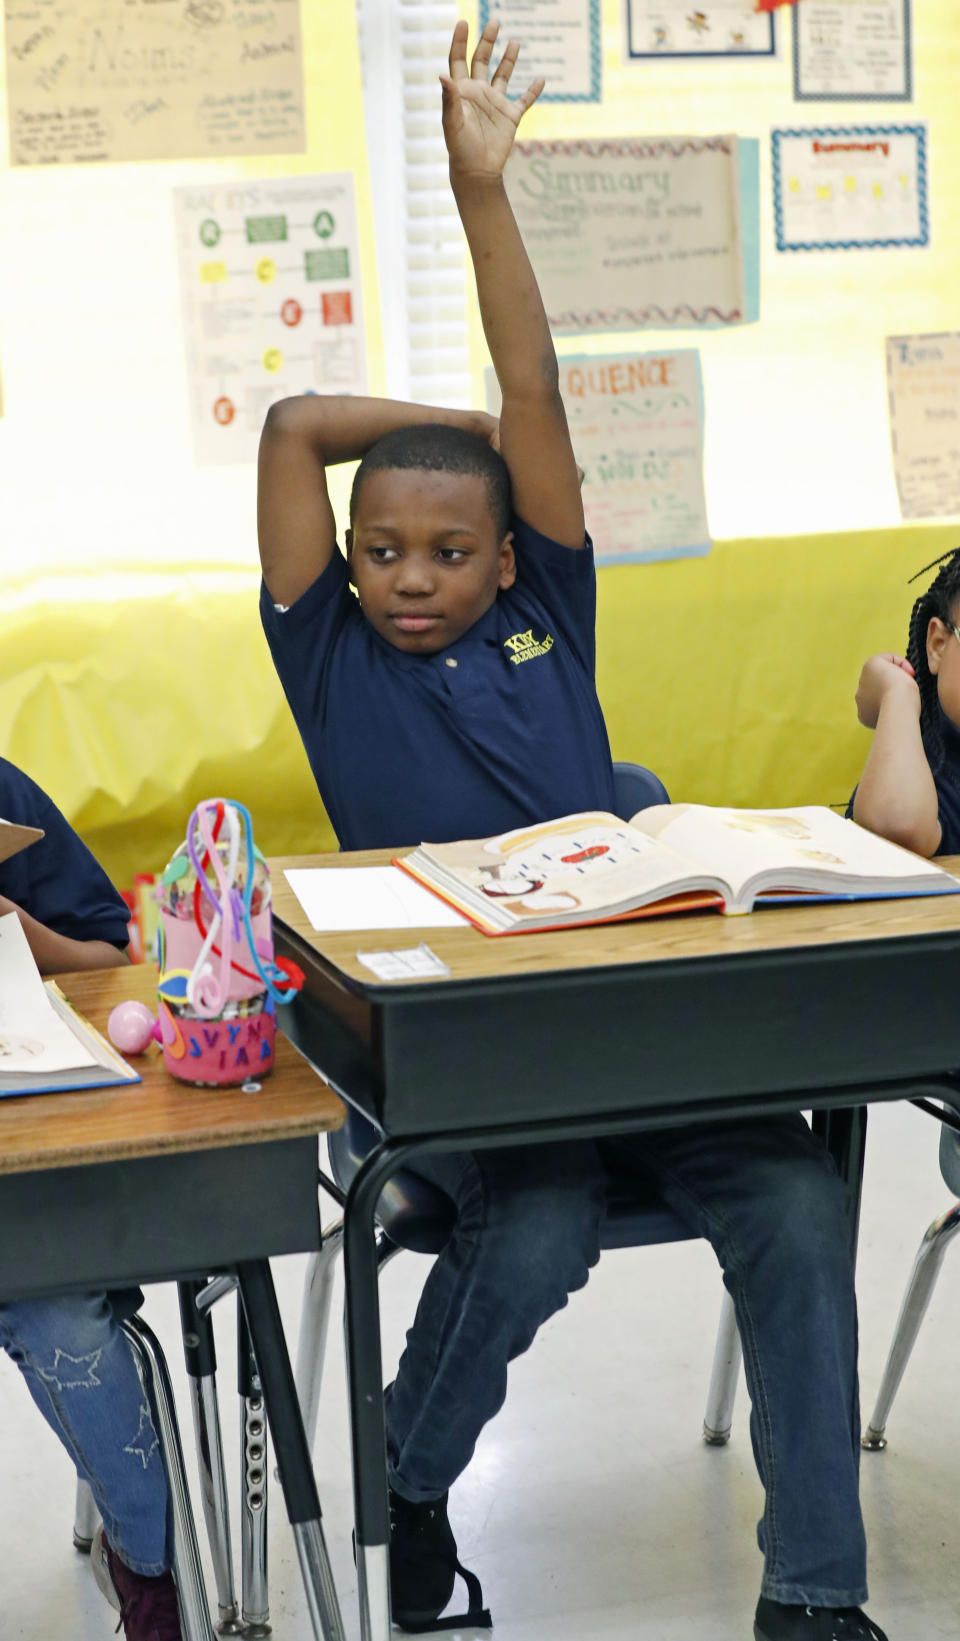 Anthony Wilder, a Key Elementary School third grade student, raises his arm with a reading question answer Thursday, April 18, 2019, in Jackson, Miss. More than 35,000 Mississippi third graders sat down in front of computers this week to take reading tests, facing a state mandate to "level up" or not advance to fourth grade. And with the bar set higher this year, state and local officials expect more students will fail the initial test, even with efforts to improve teaching. (AP Photo/Rogelio V. Solis)